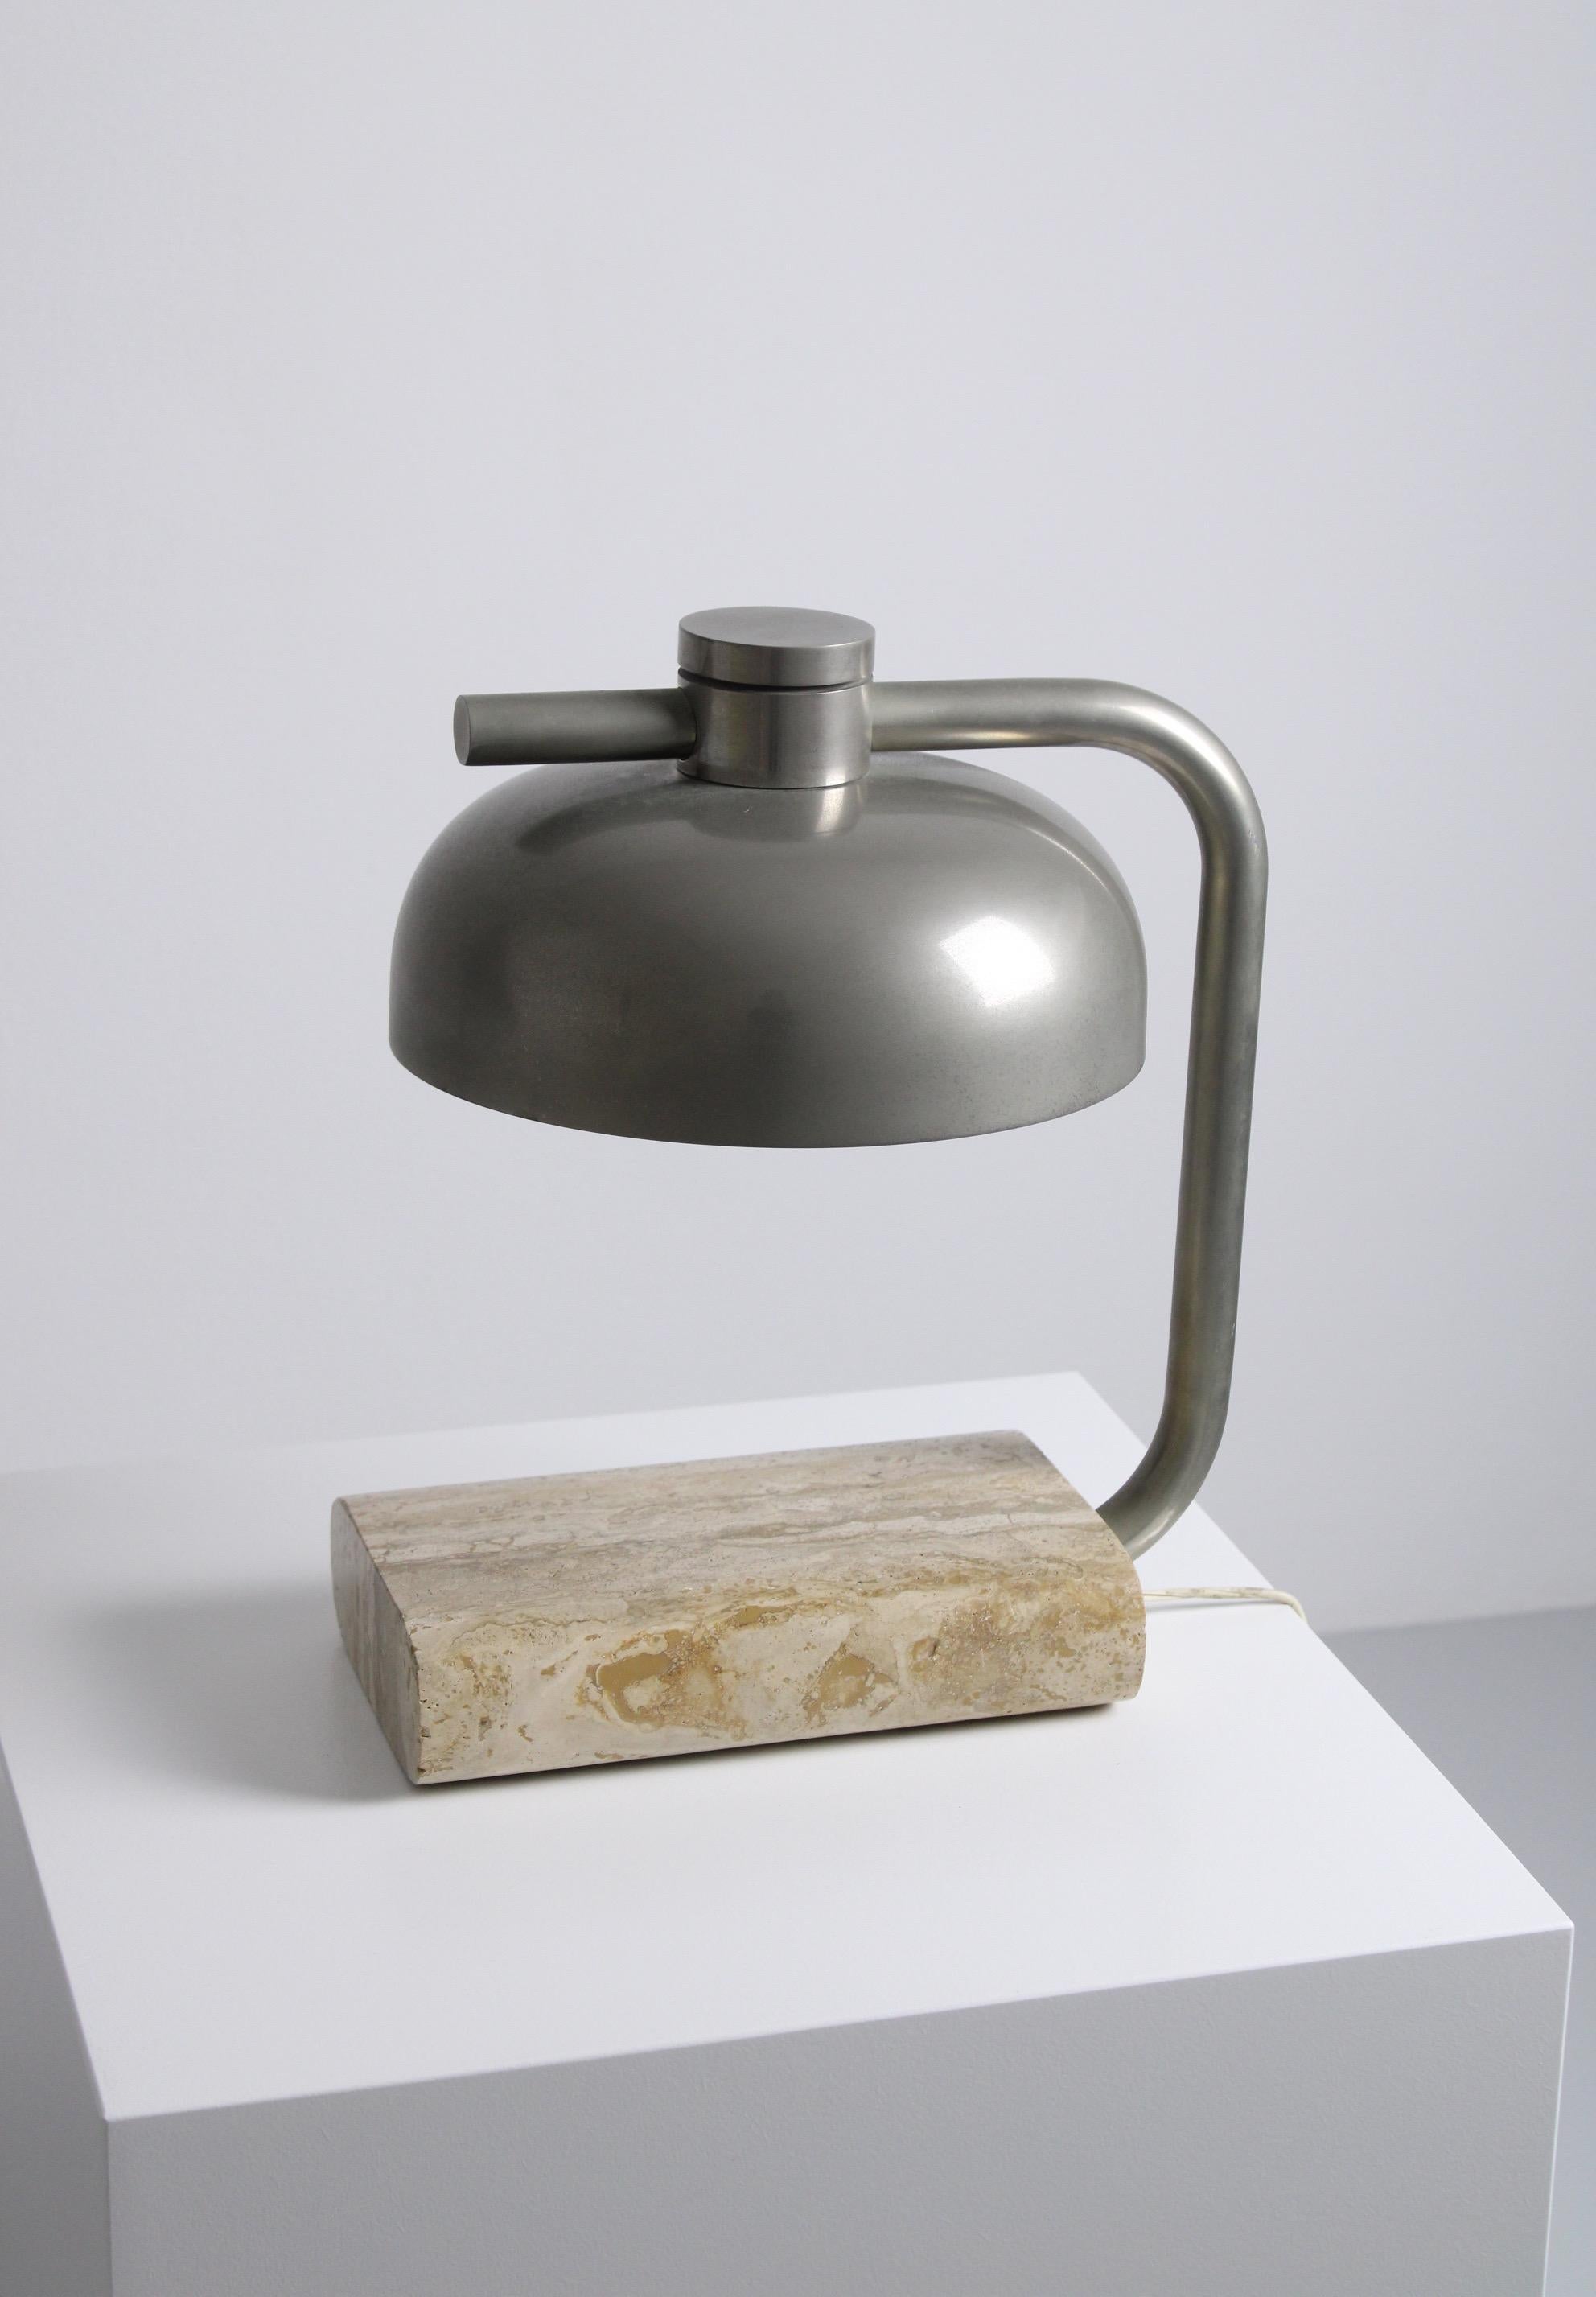 Rare table lamp by Paolo Salvi, made in Italy in the 1970s. It’s made of travertine, which is a common natural stone in Italy. The stem of the lamp goes up and holds a round shade made of chrome-plated metal which is adjustable. The mix of these